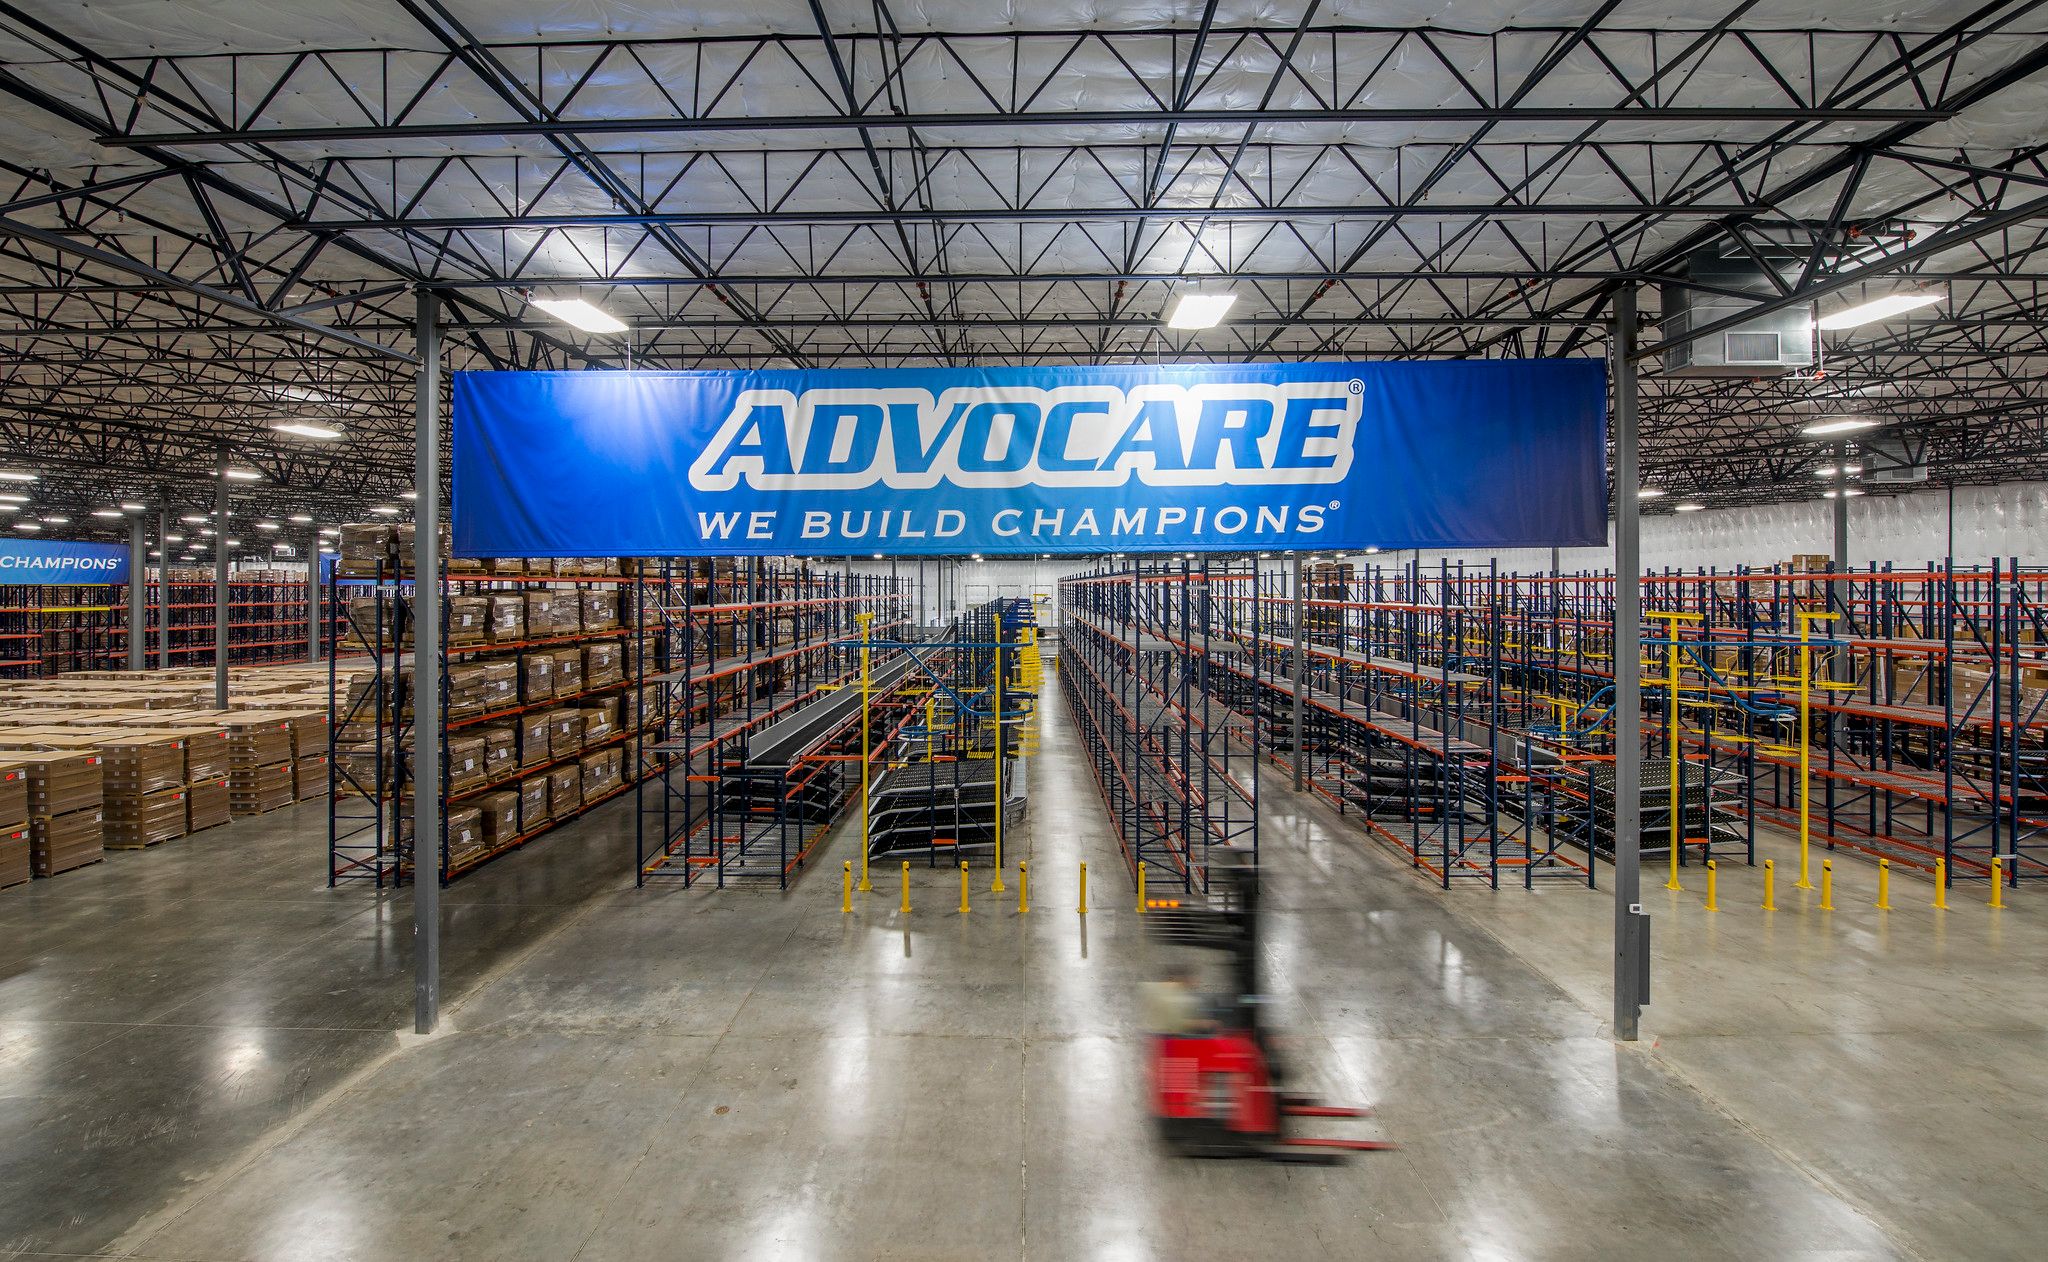 Advocare Office and Warehouse Interior 1